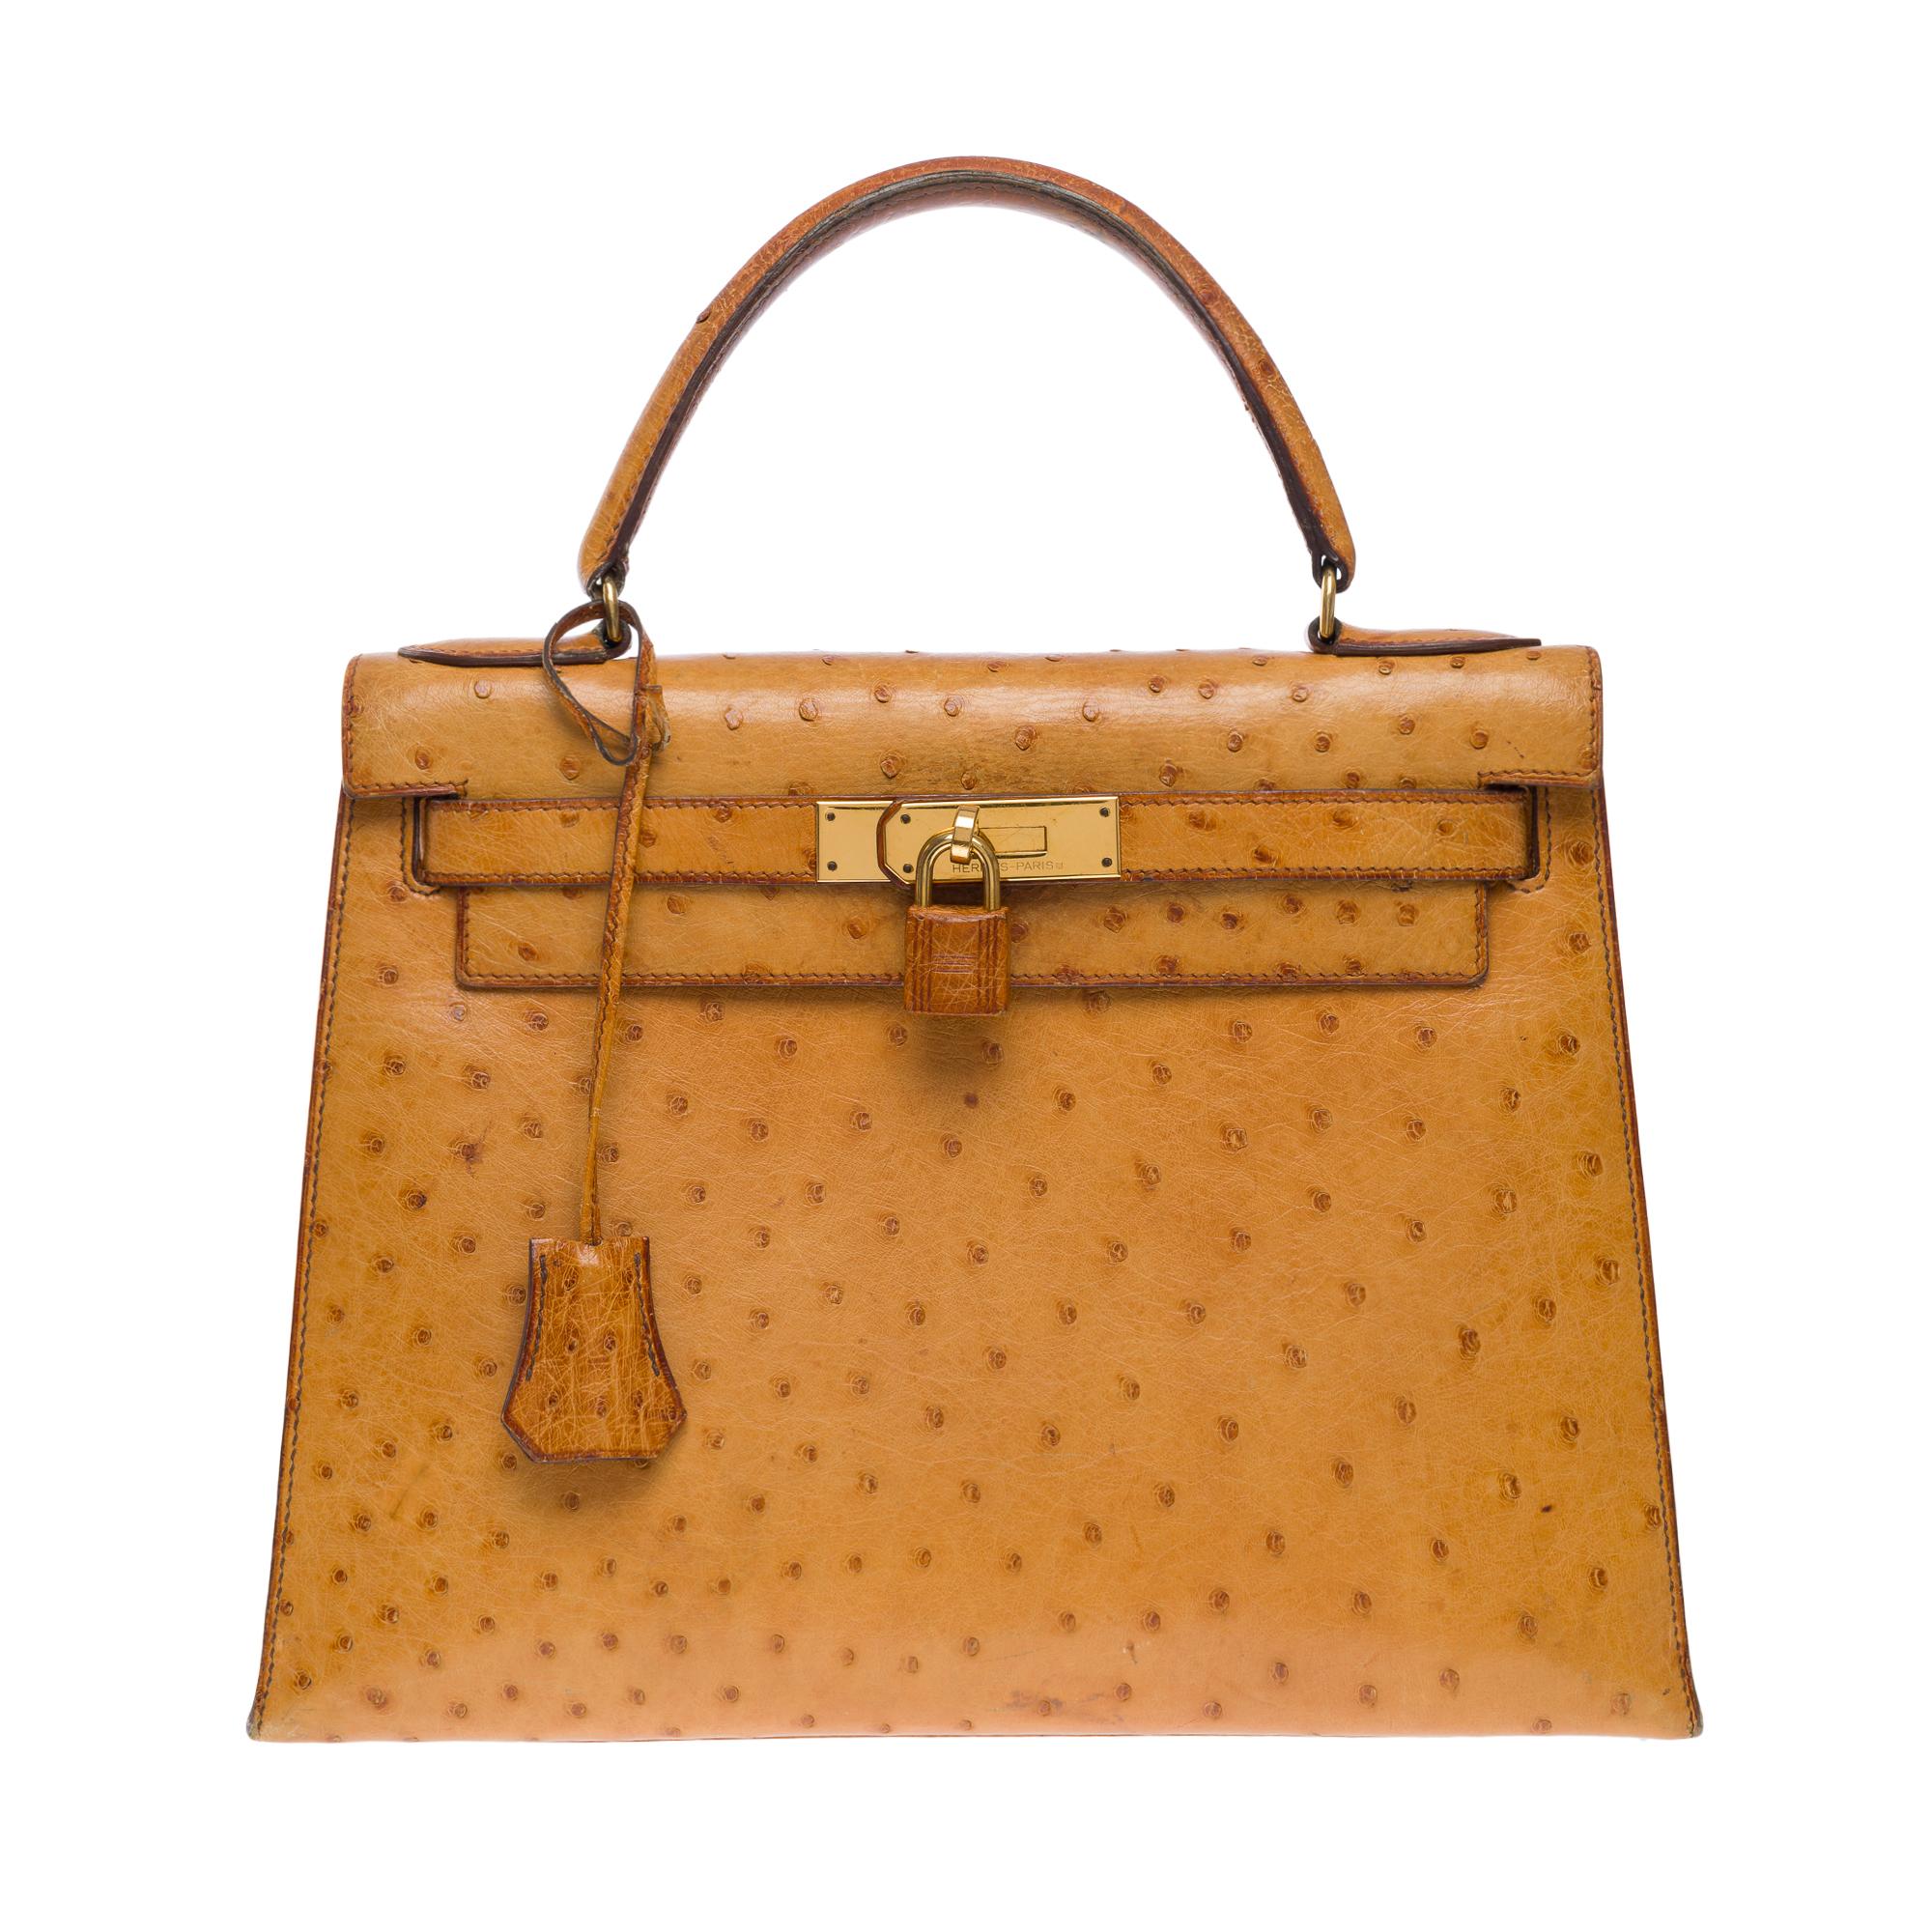 Gorgeous Hermes Kelly 28 sellier in Ostrich gold (Struthio camelus), gold plated metal trim, handle in gold ostrich allowing a hand carry

Flap closure
Gold leather inner lining, one zippered pocket, two patch pockets
Signature: 